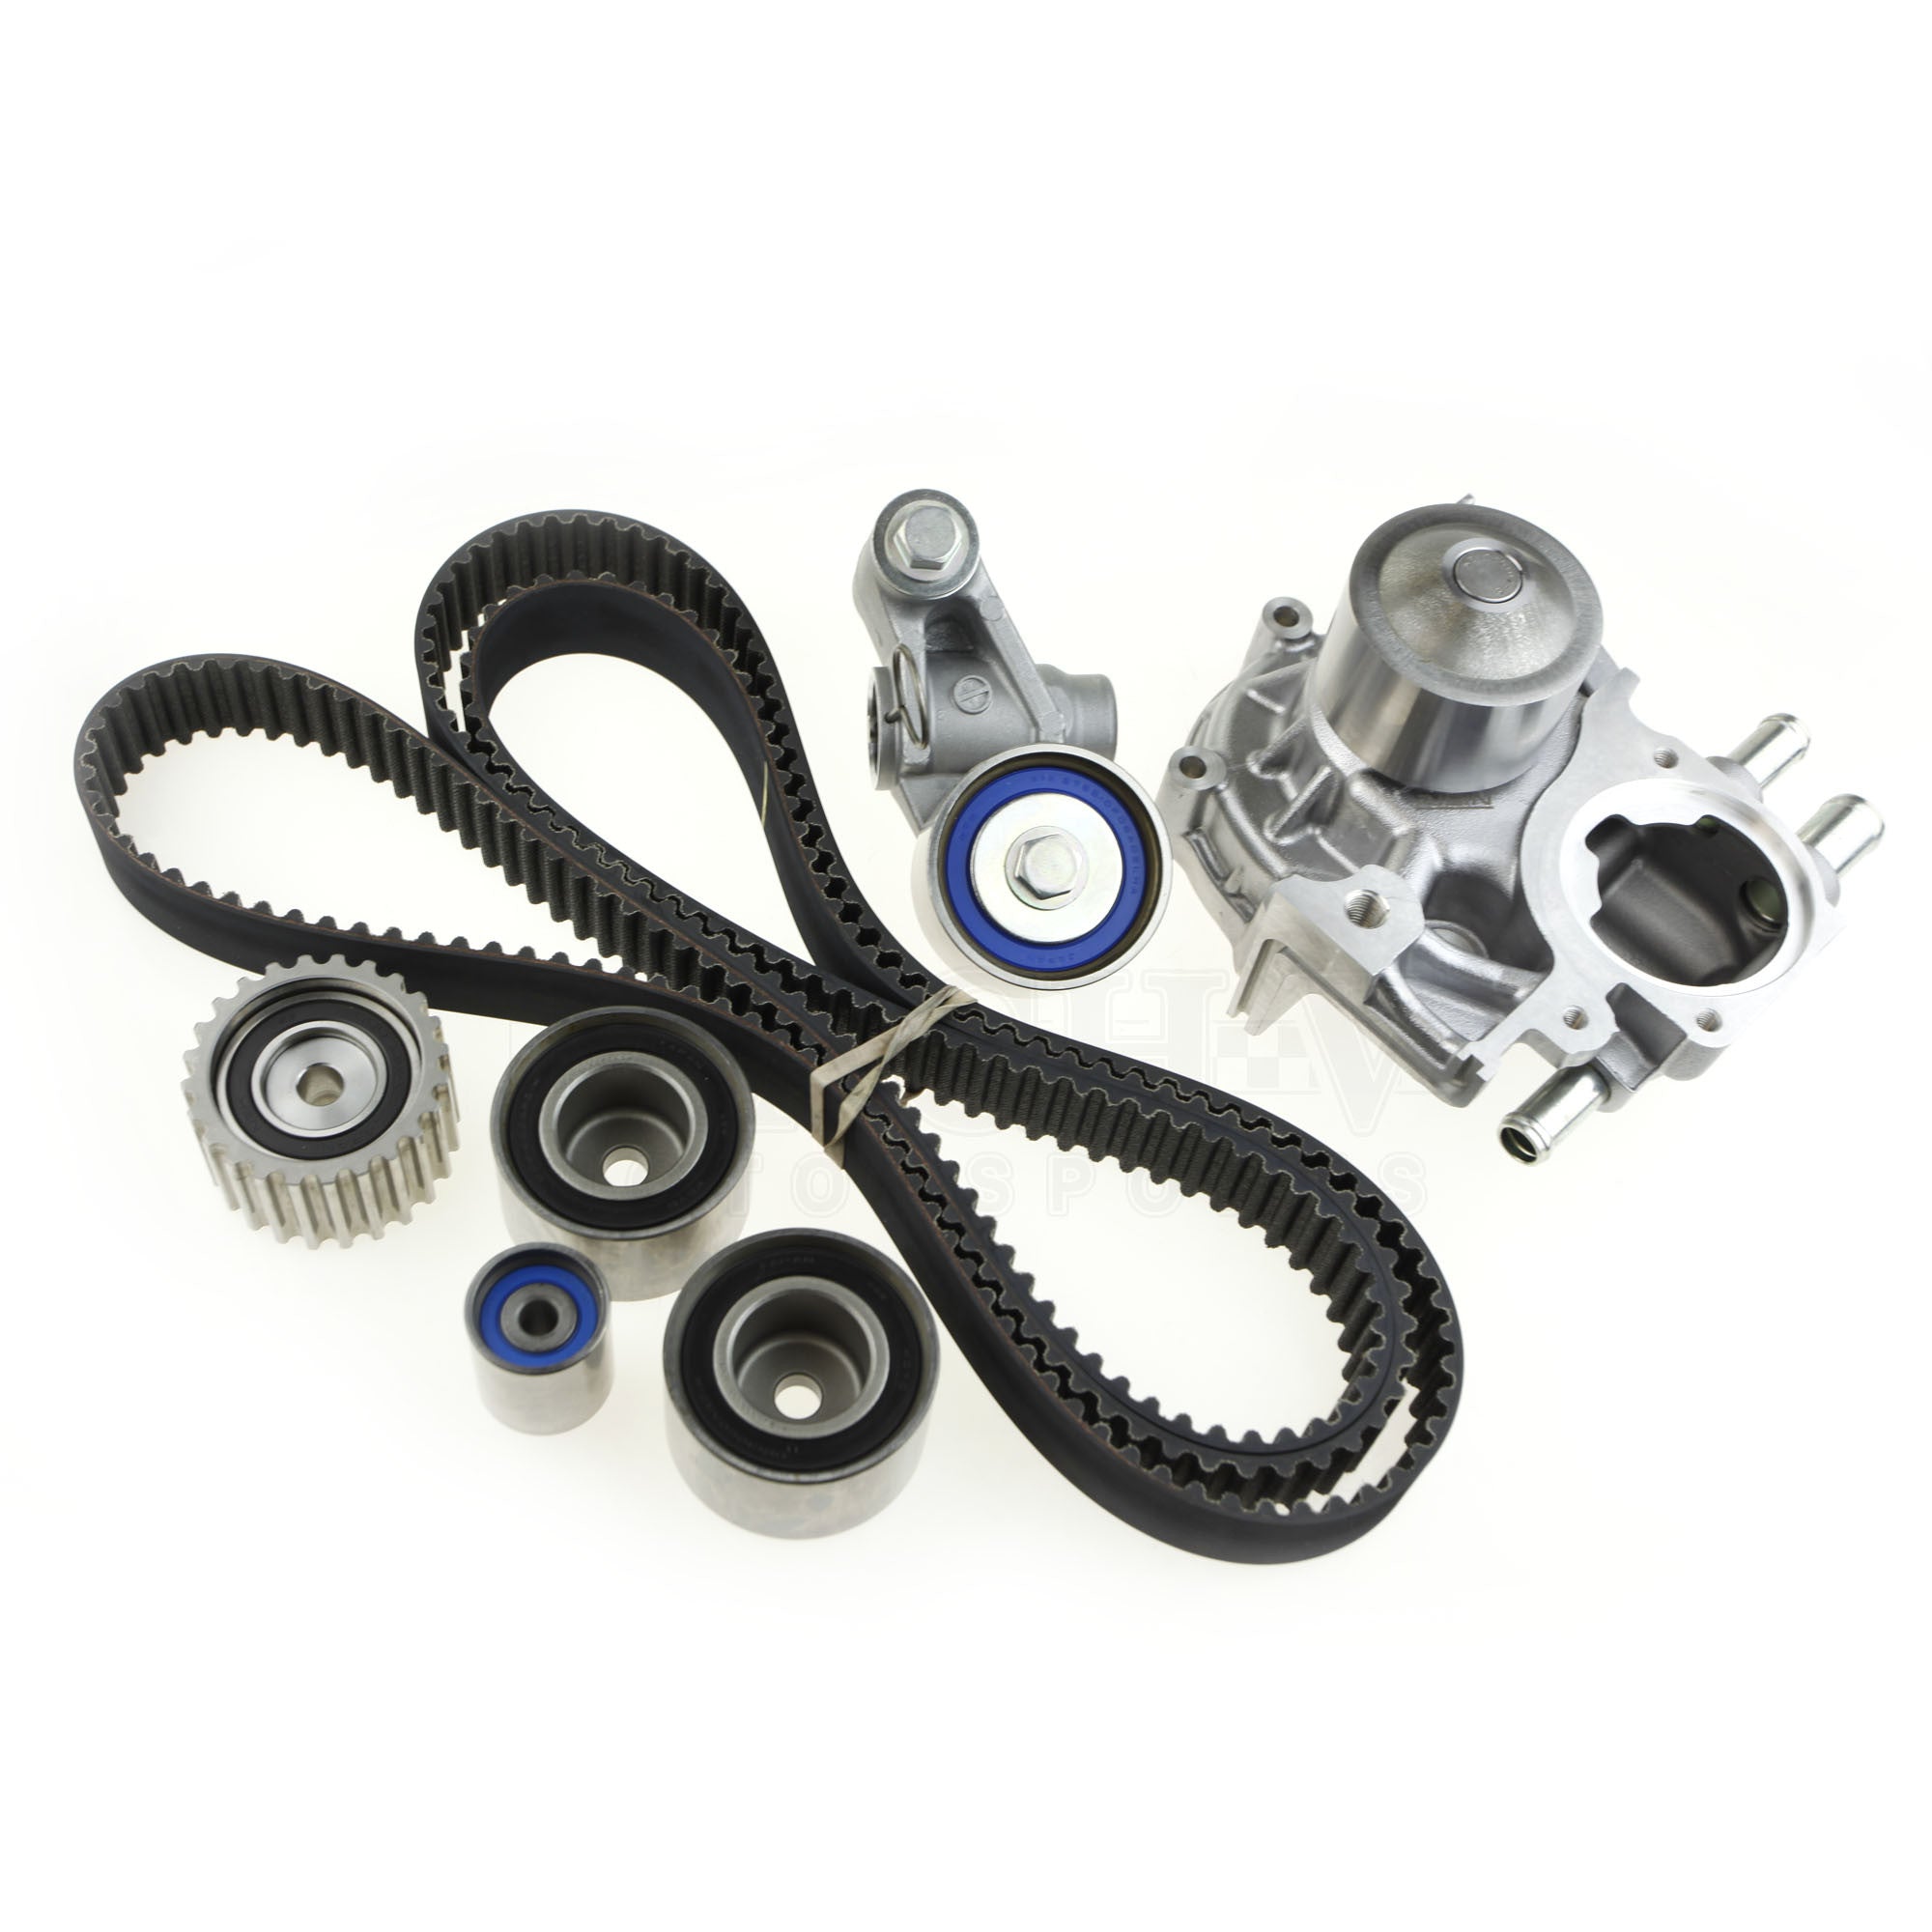 OEM-Quality Timing Belt Kit with Water Pump 2006-2007 WRX, 2004-2021 STI, 2004-2007 Forester XT